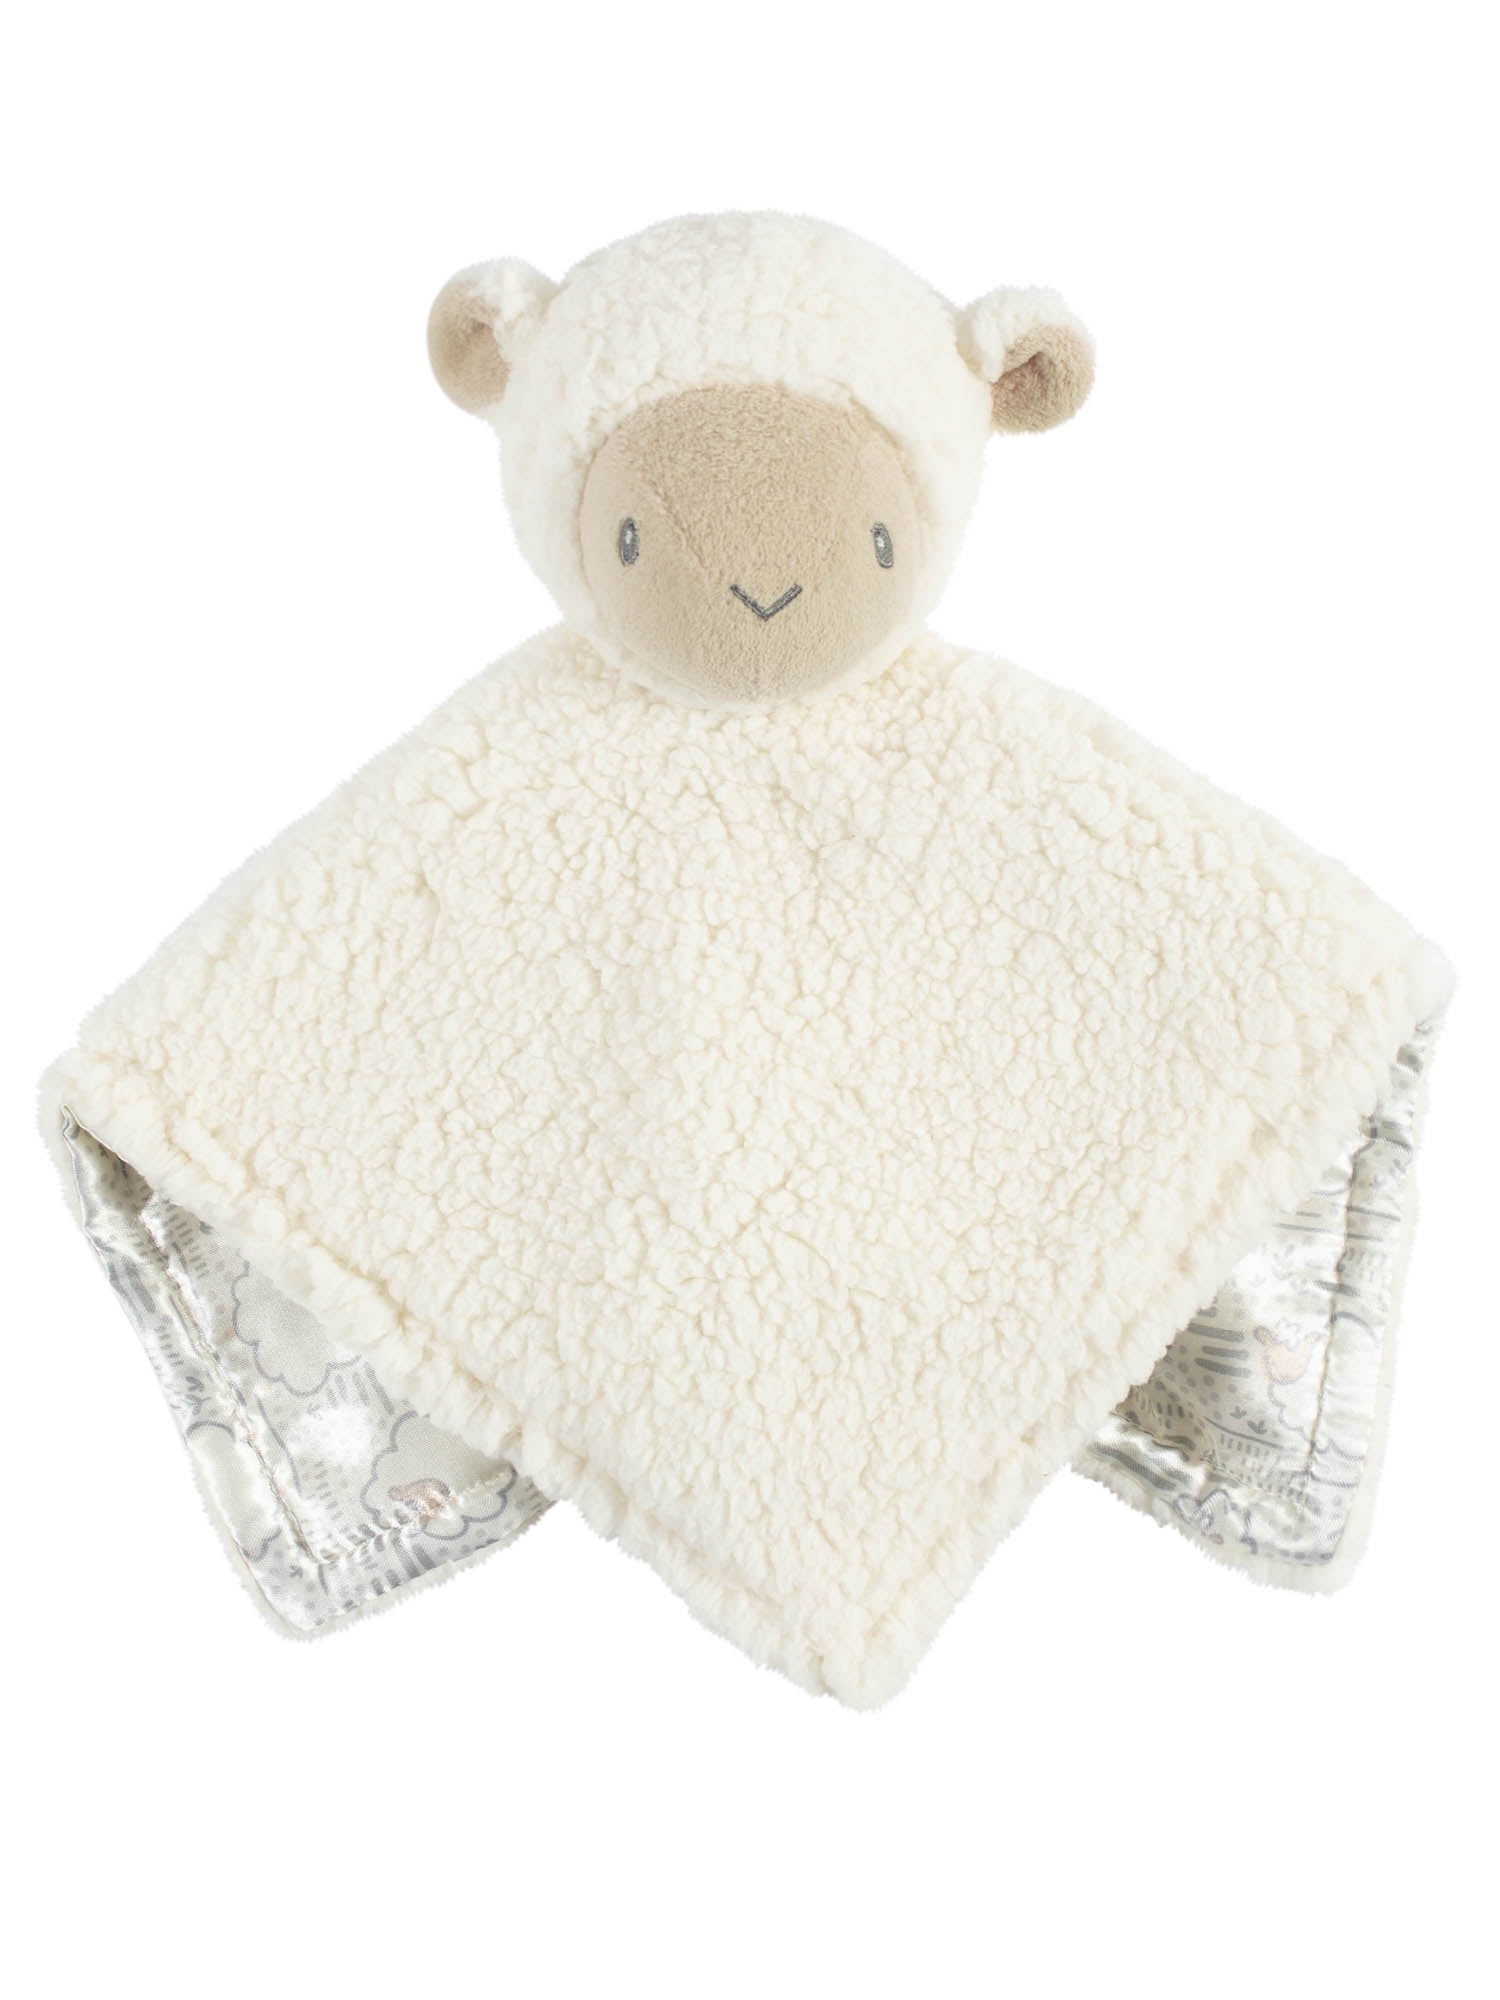 ORIGINAL SOFT TAGGY  *My Special Little Blanket* ~ Personalised  Cute Lamb  NEW! 